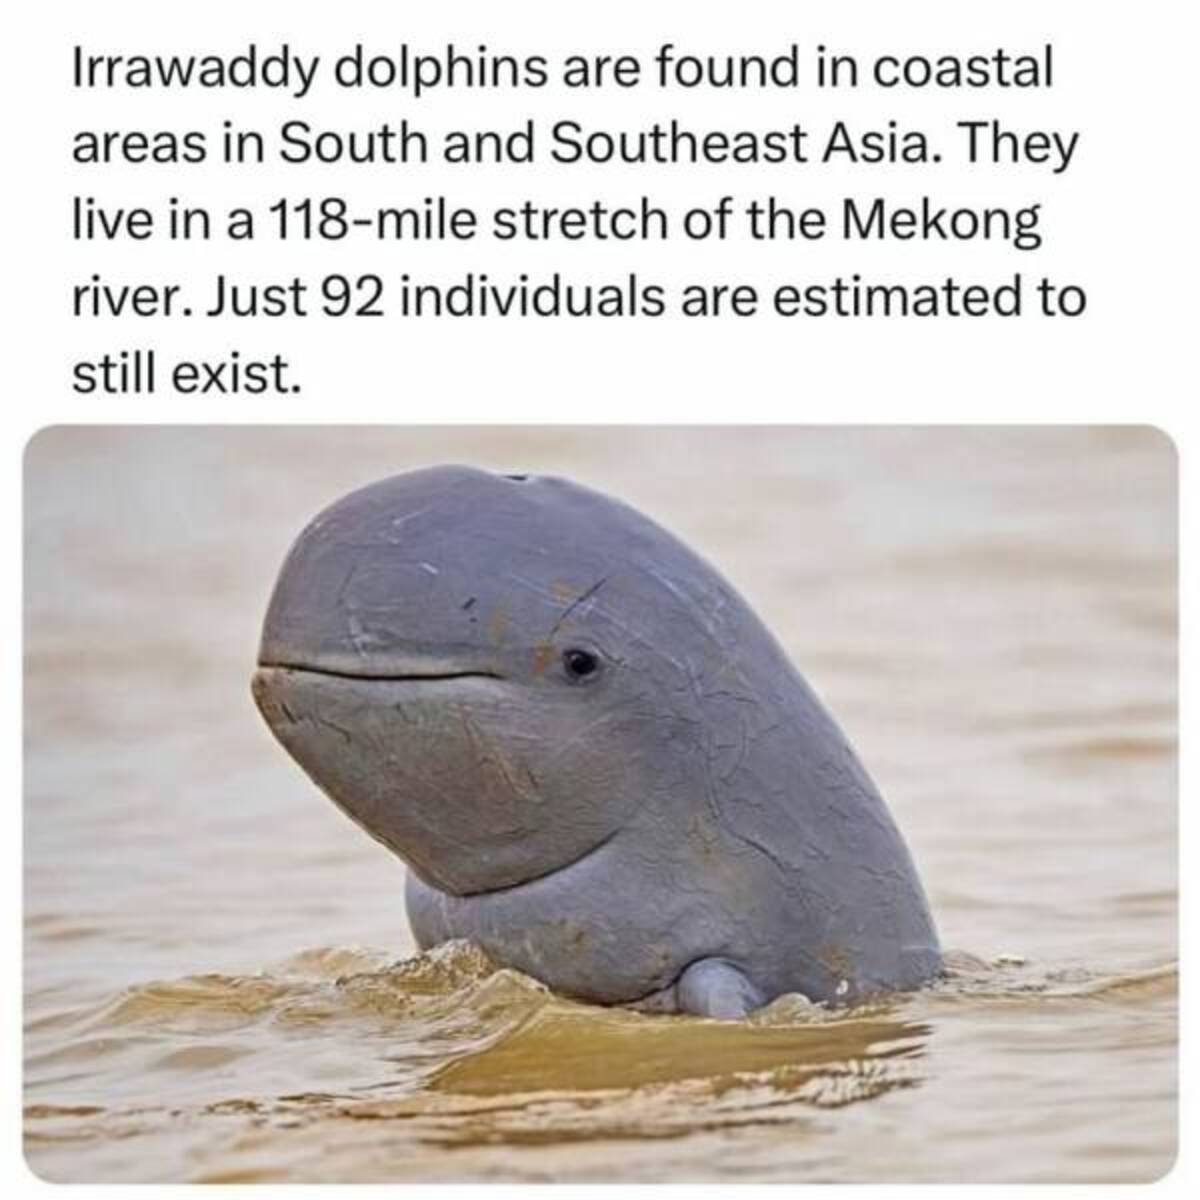 cambodia animals - Irrawaddy dolphins are found in coastal areas in South and Southeast Asia. They live in a 118mile stretch of the Mekong river. Just 92 individuals are estimated to still exist.